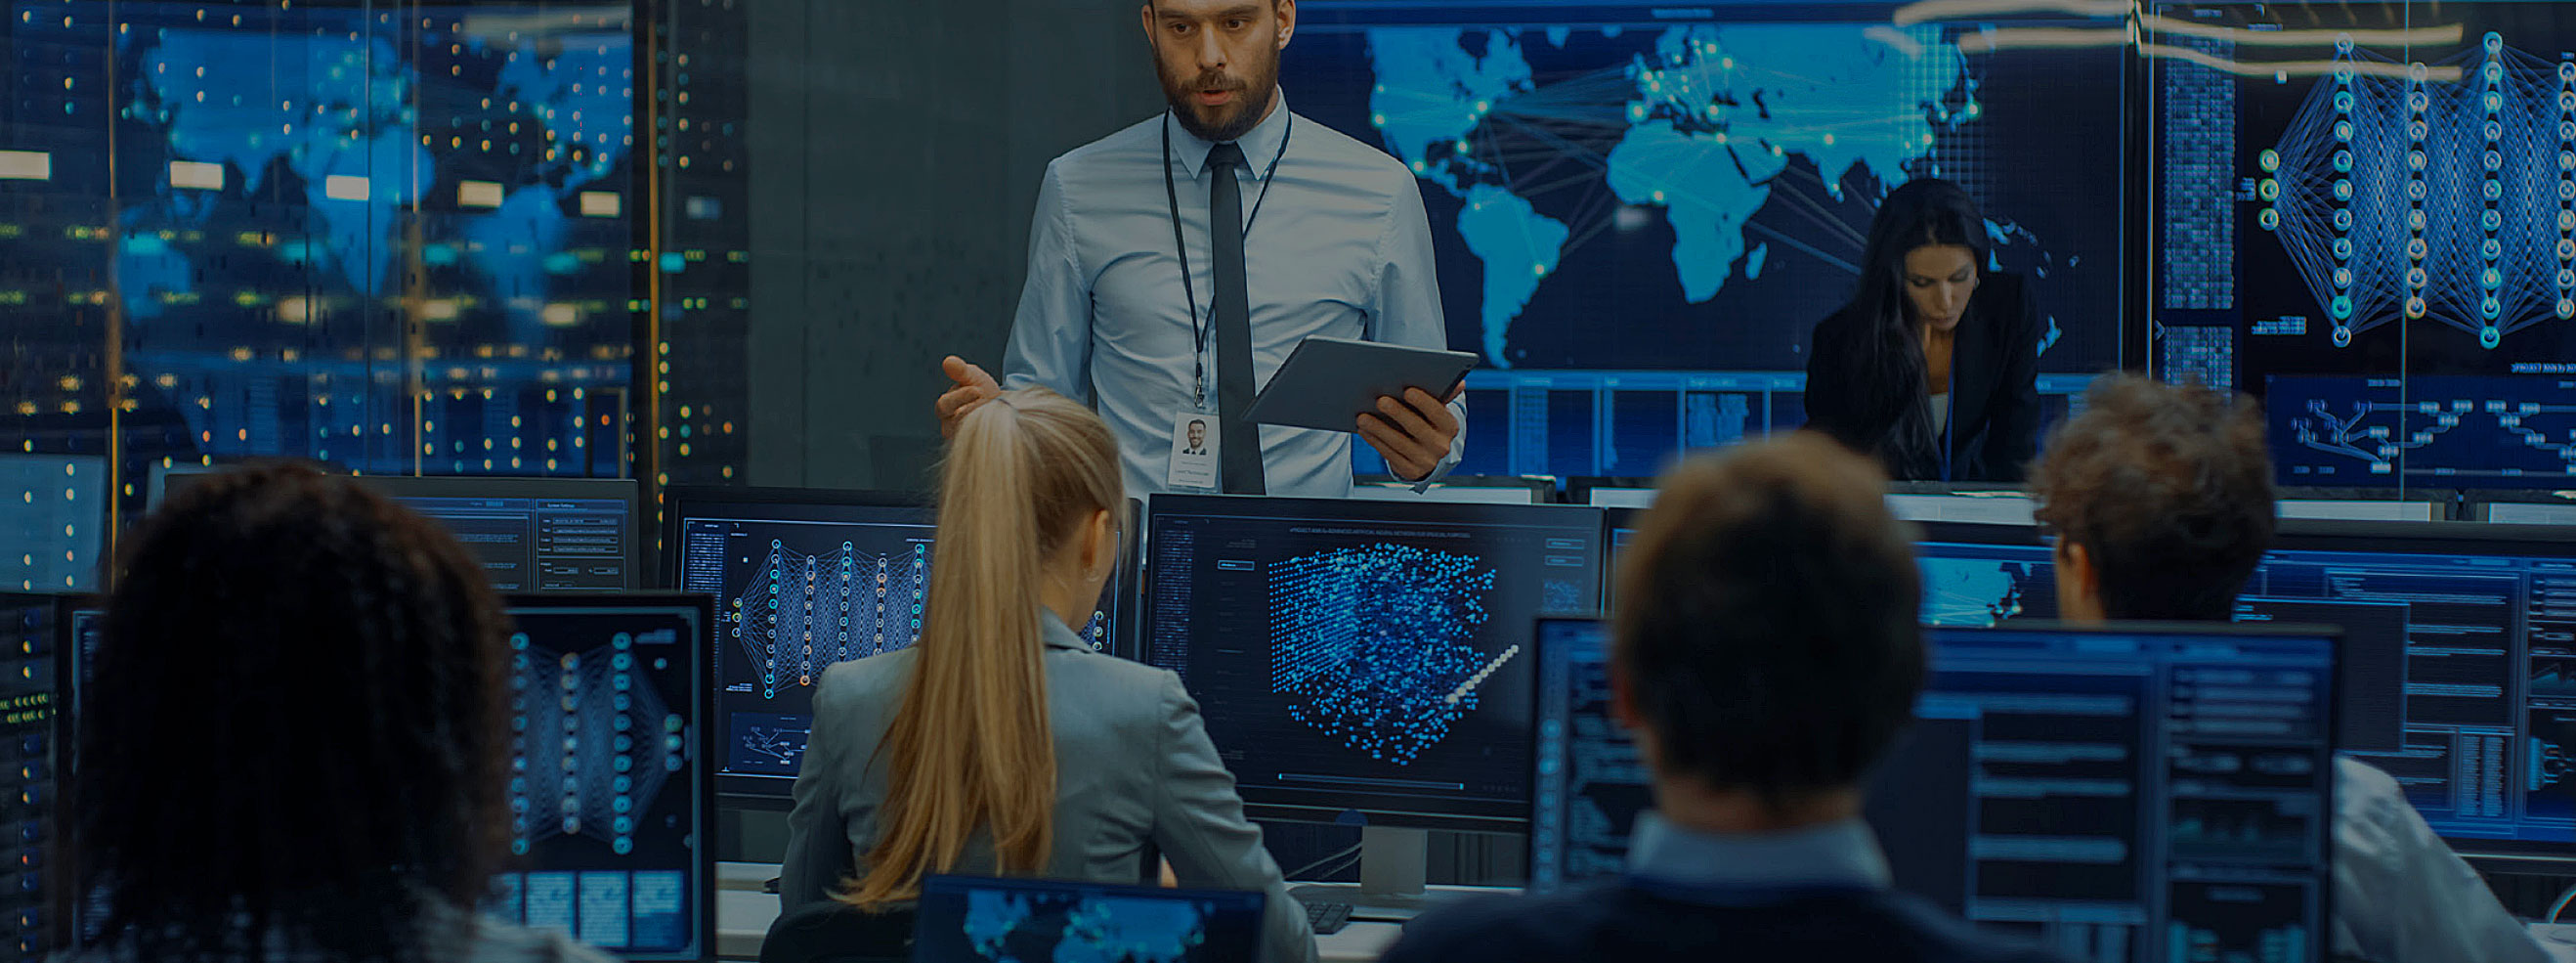 VMS One transforms the SOC by enabling intelligent, data-driven security management and response while simplifying operations and reducing costs.